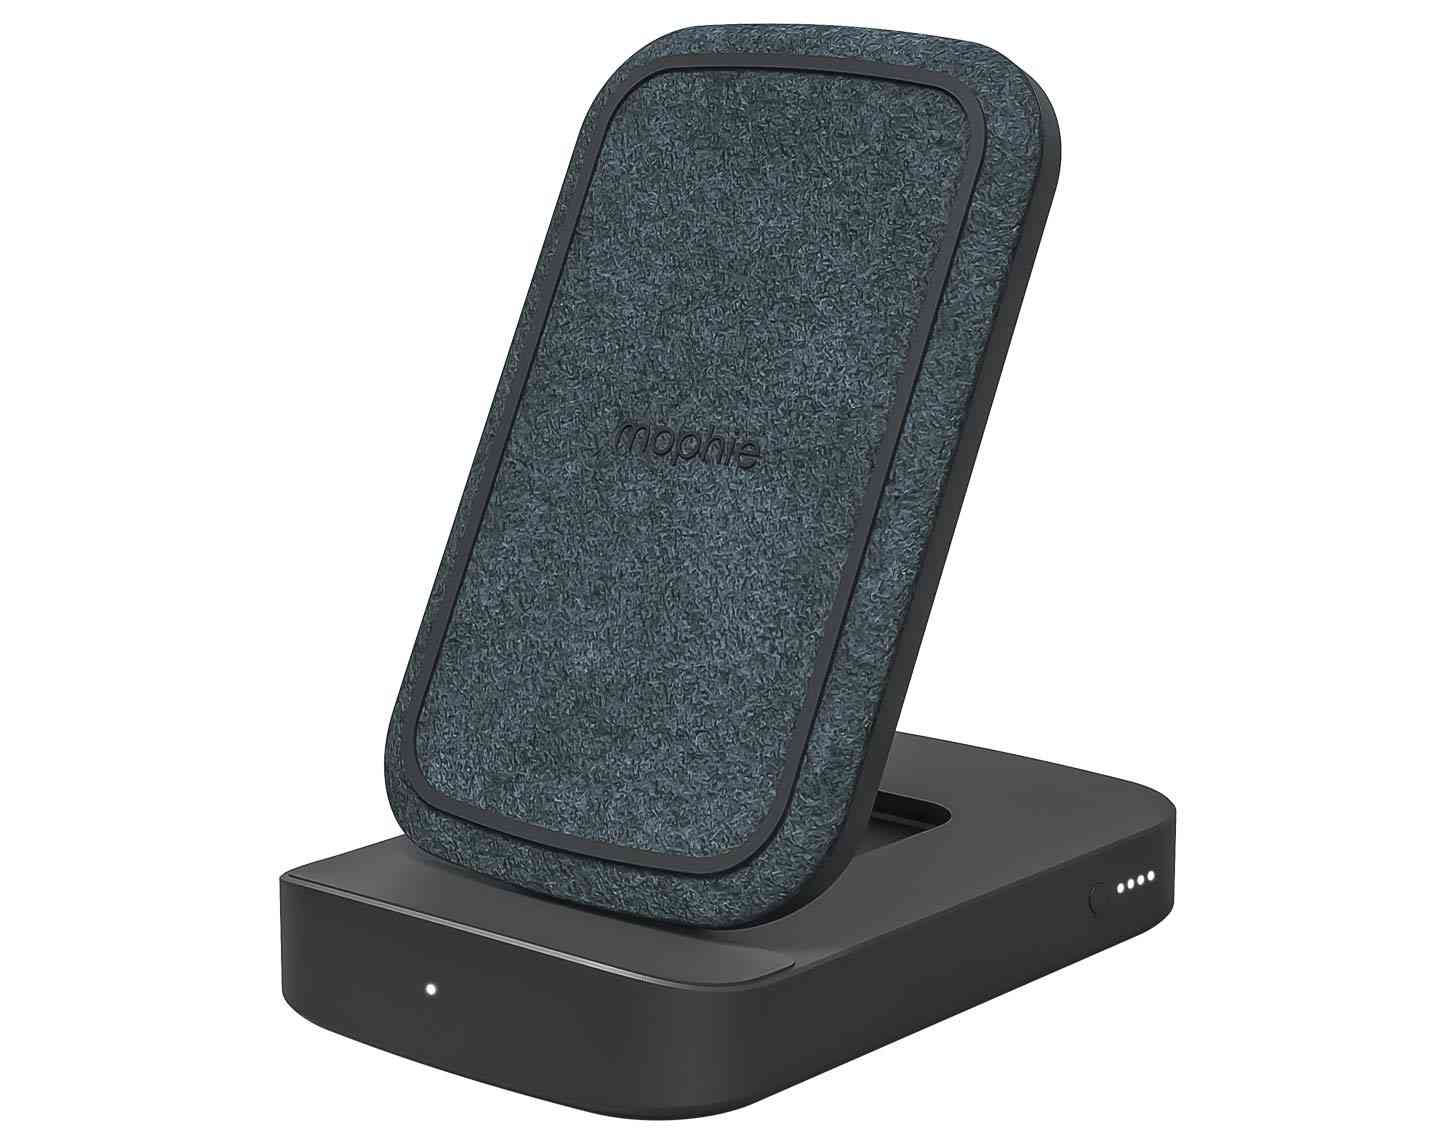 Mophie Powerstation Wireless Stand official